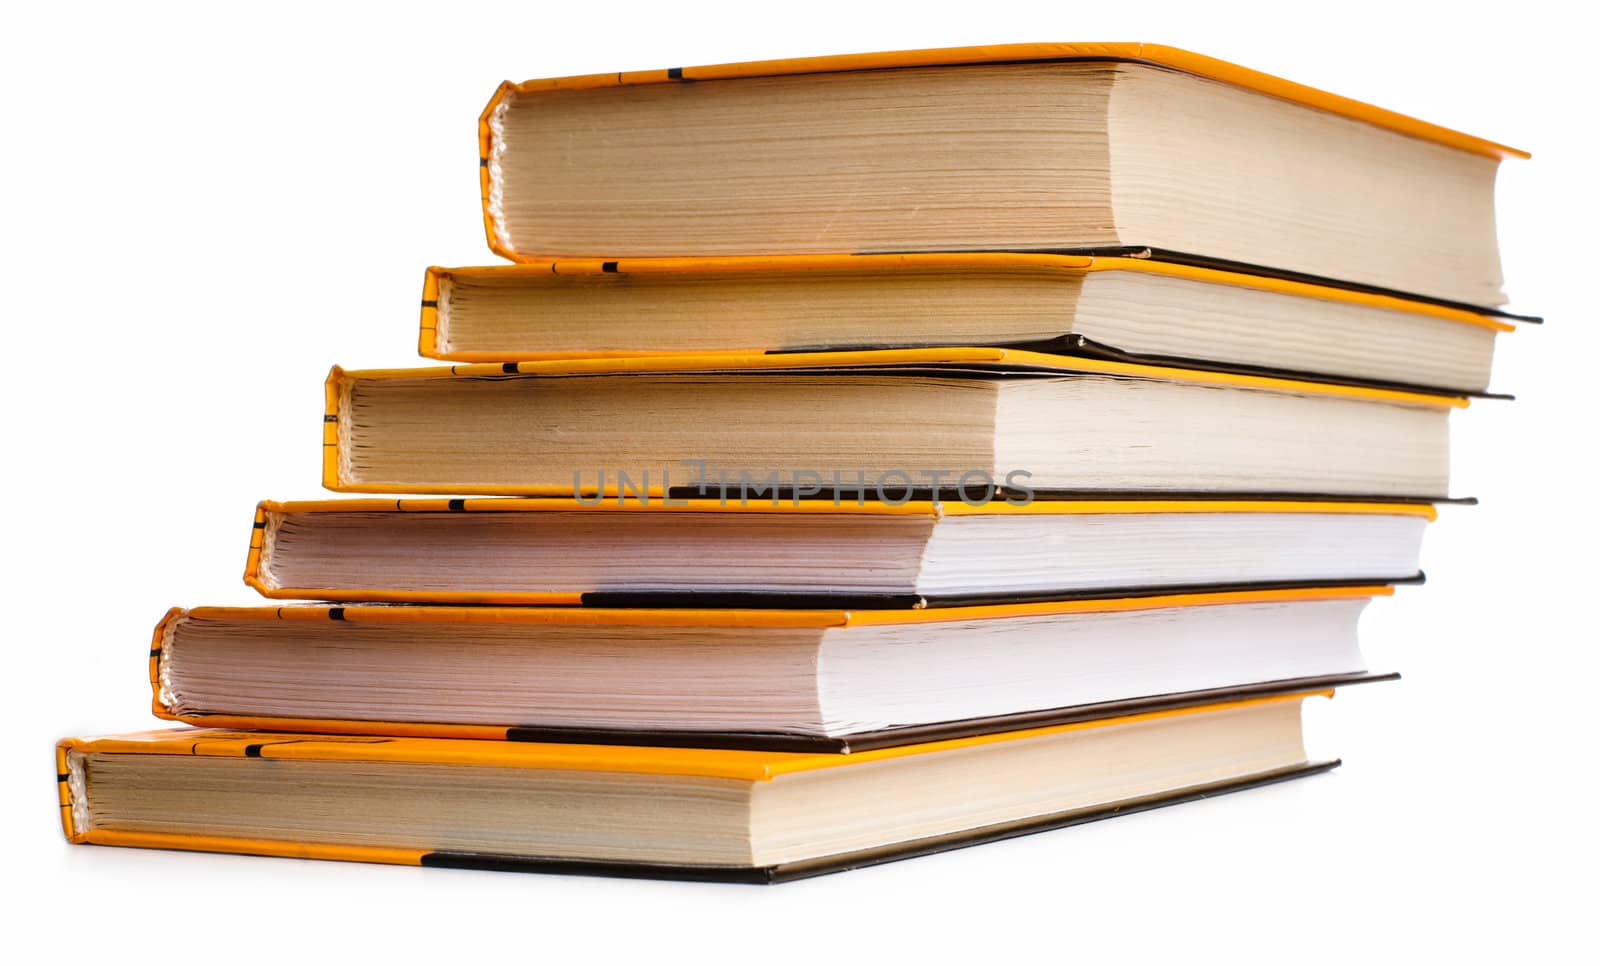 Big stack of yellow books isolated on white background